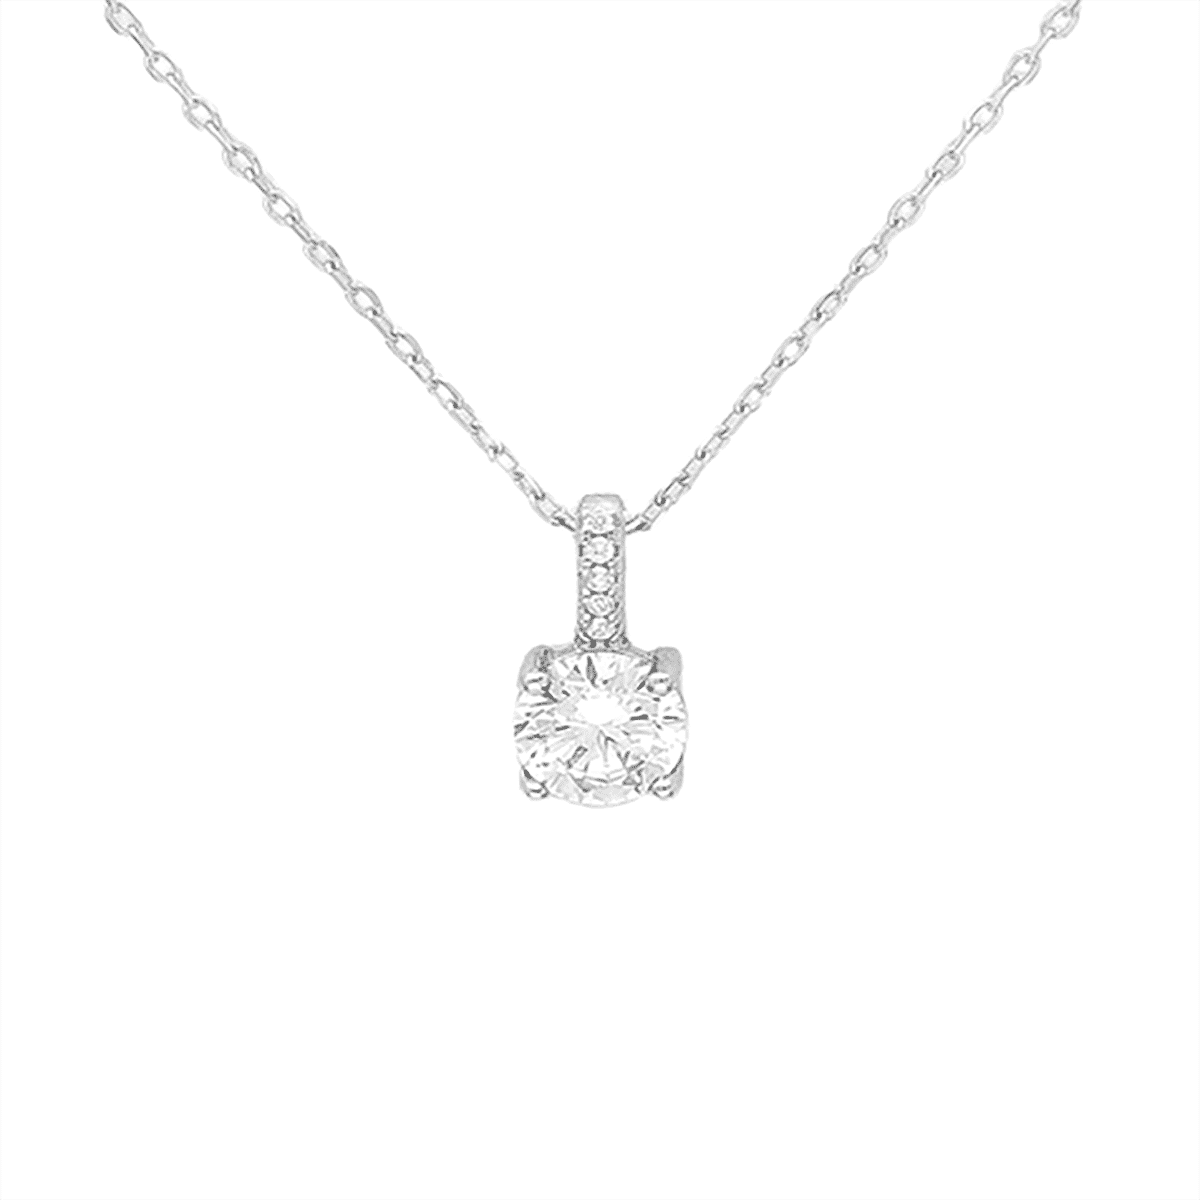 Asfour 925 Sterling Silver Necklace - NT0128